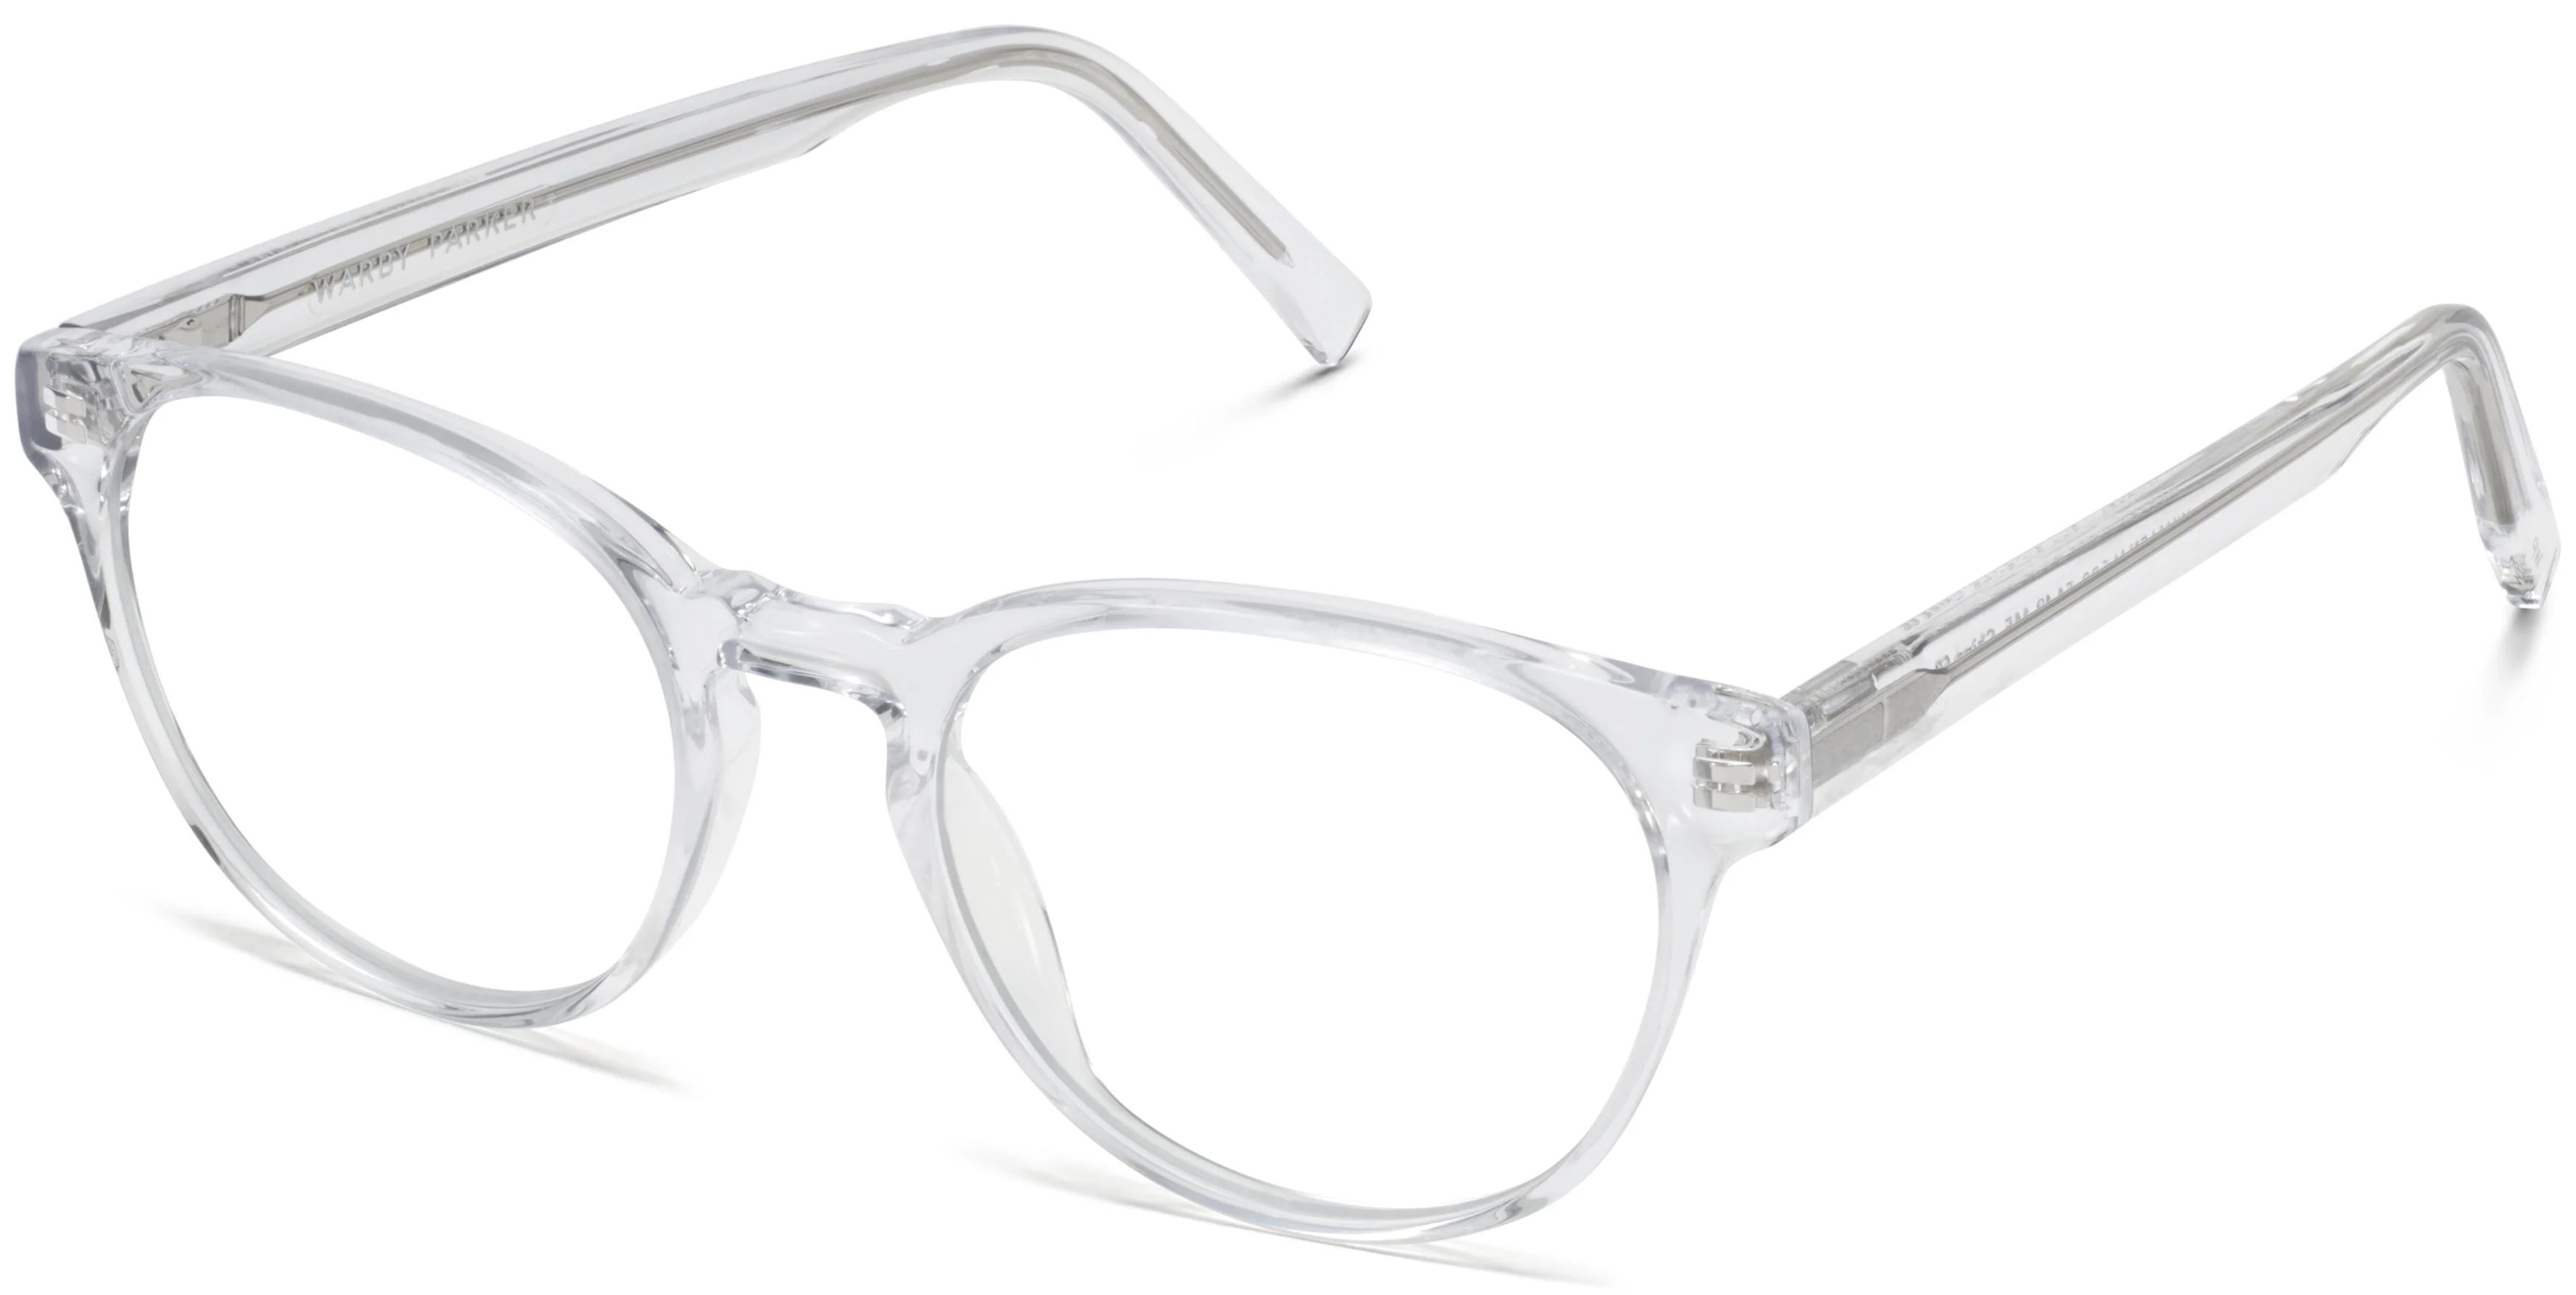 Whalen Eyeglasses in Crystal | Warby Parker | Warby Parker (US)